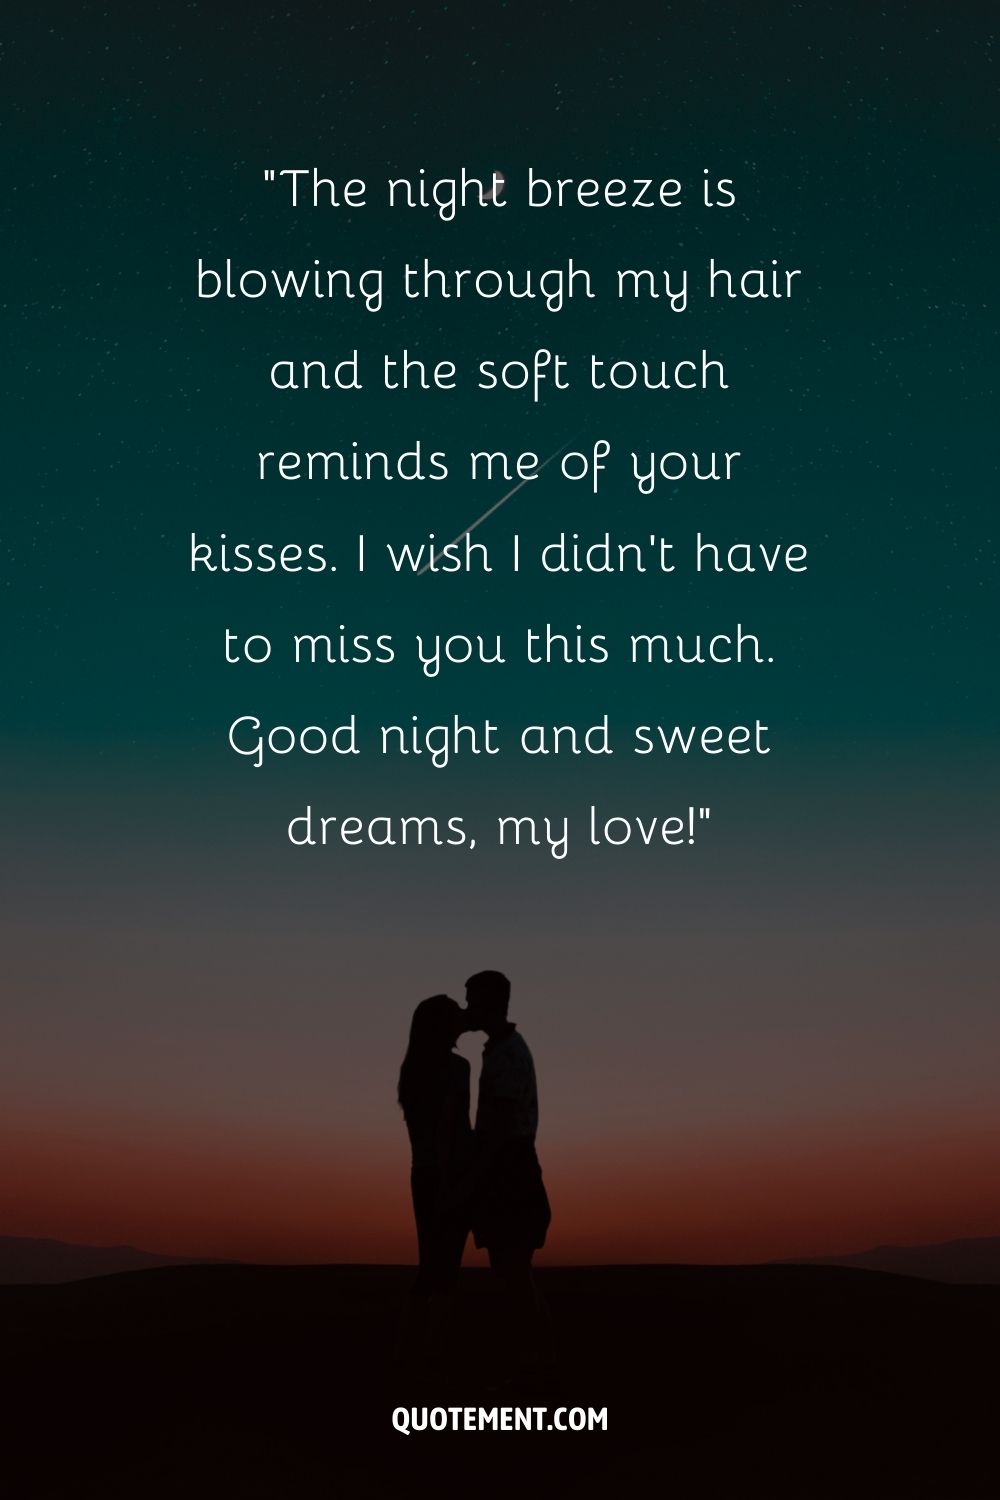 Two figures in a close embrace, silhouetted against a star-filled sky with a crescent moon